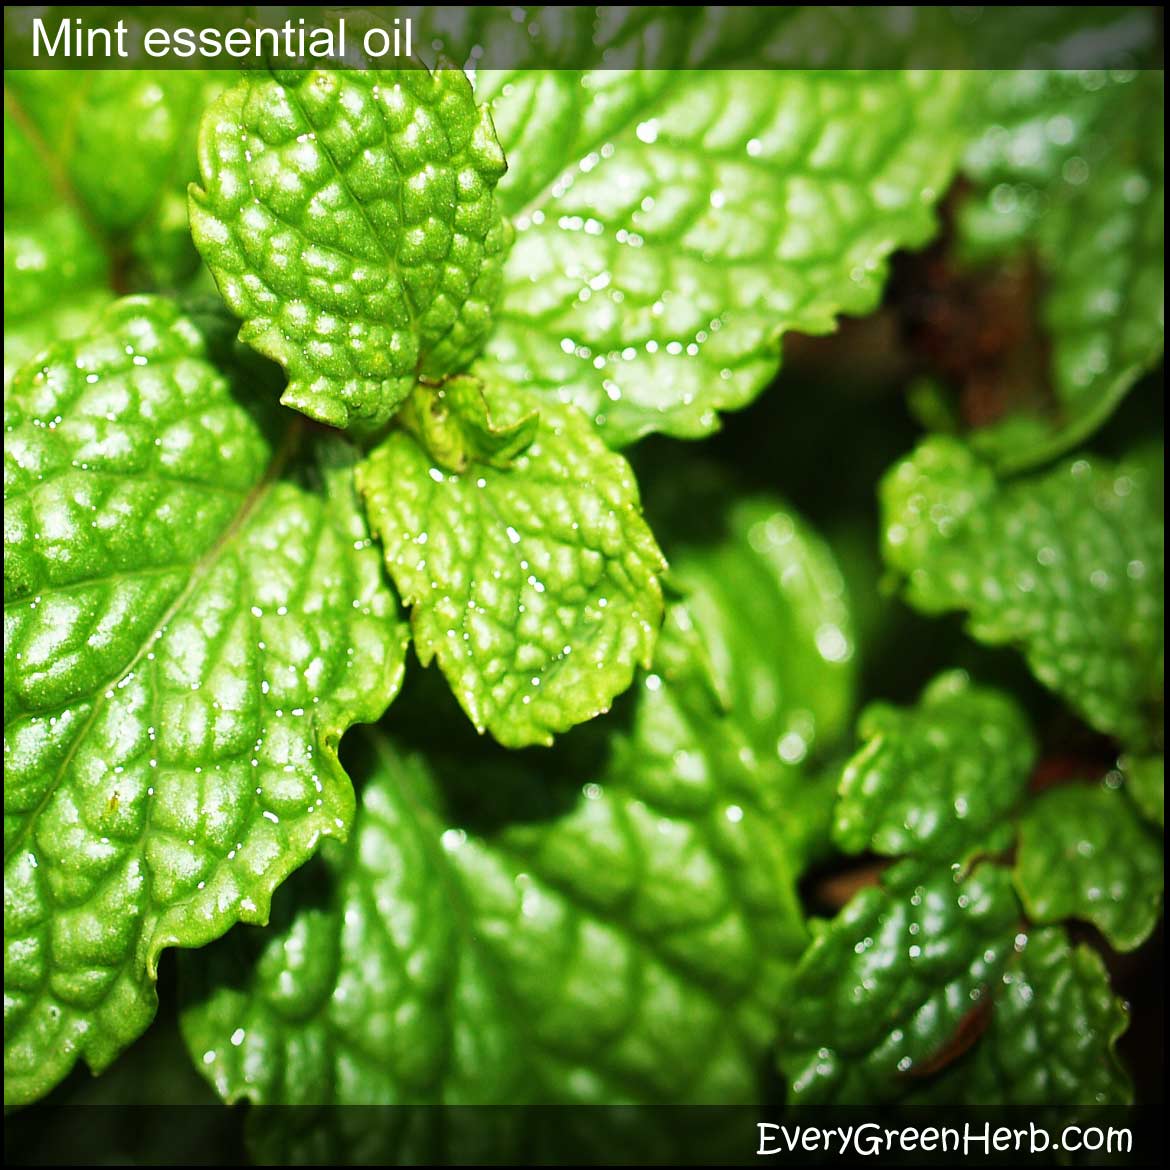 Tips for using mint essential oil in herbal medicine and aromatherapy